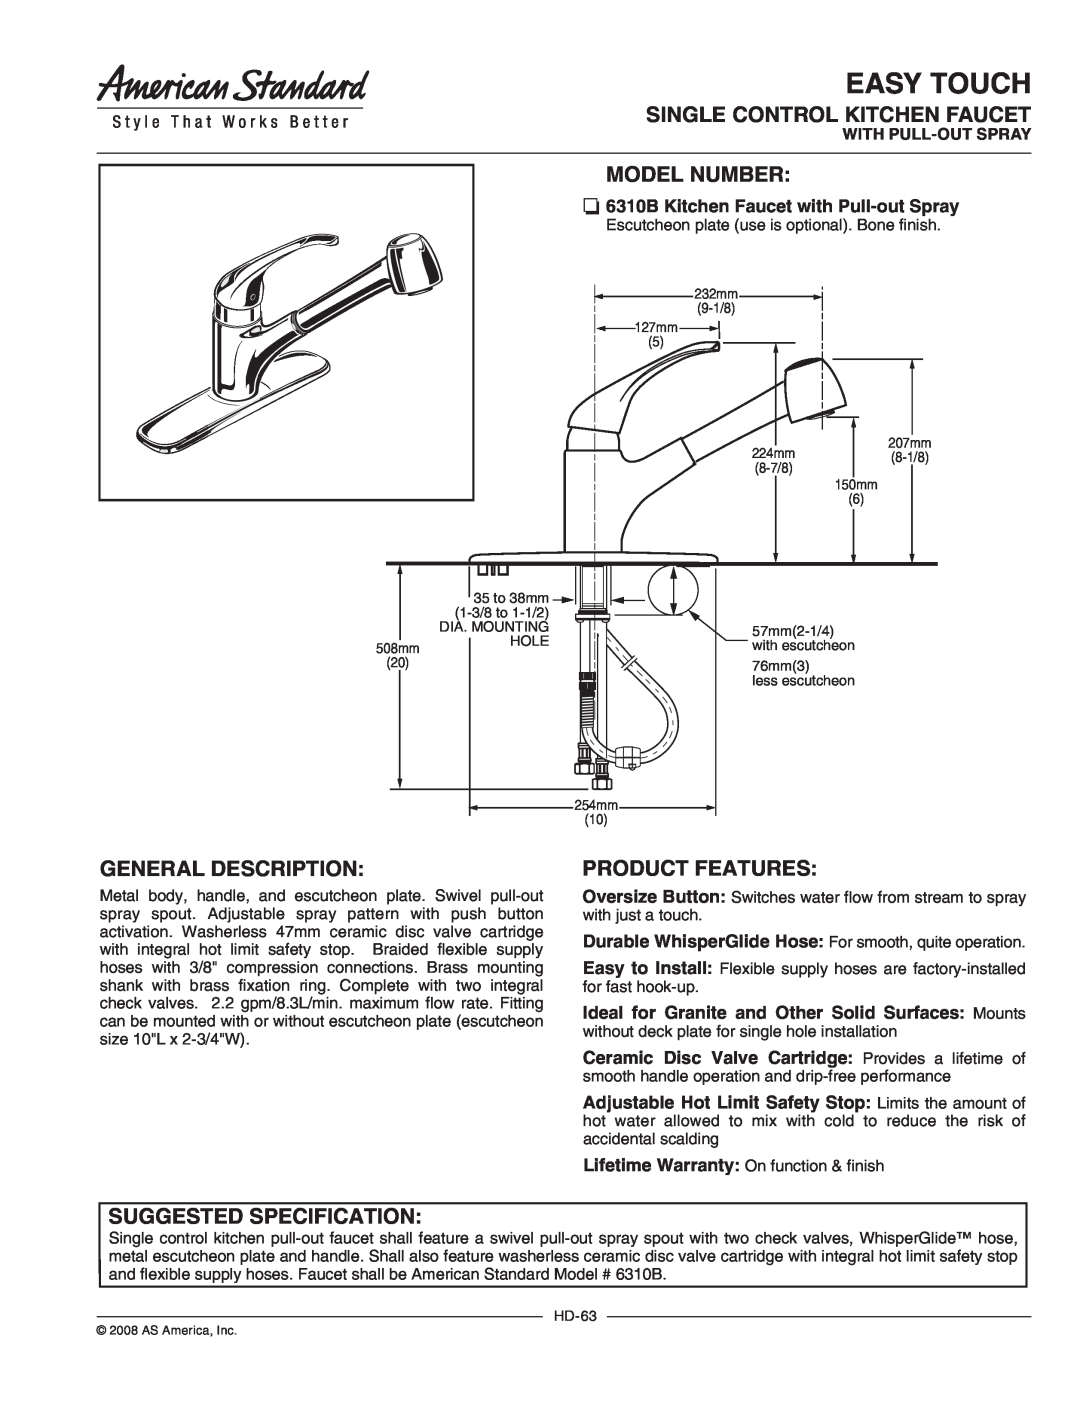 American Standard warranty Easy Touch, 6310B Kitchen Faucet with Pull-outSpray, With Pull-Outspray, Model Number 